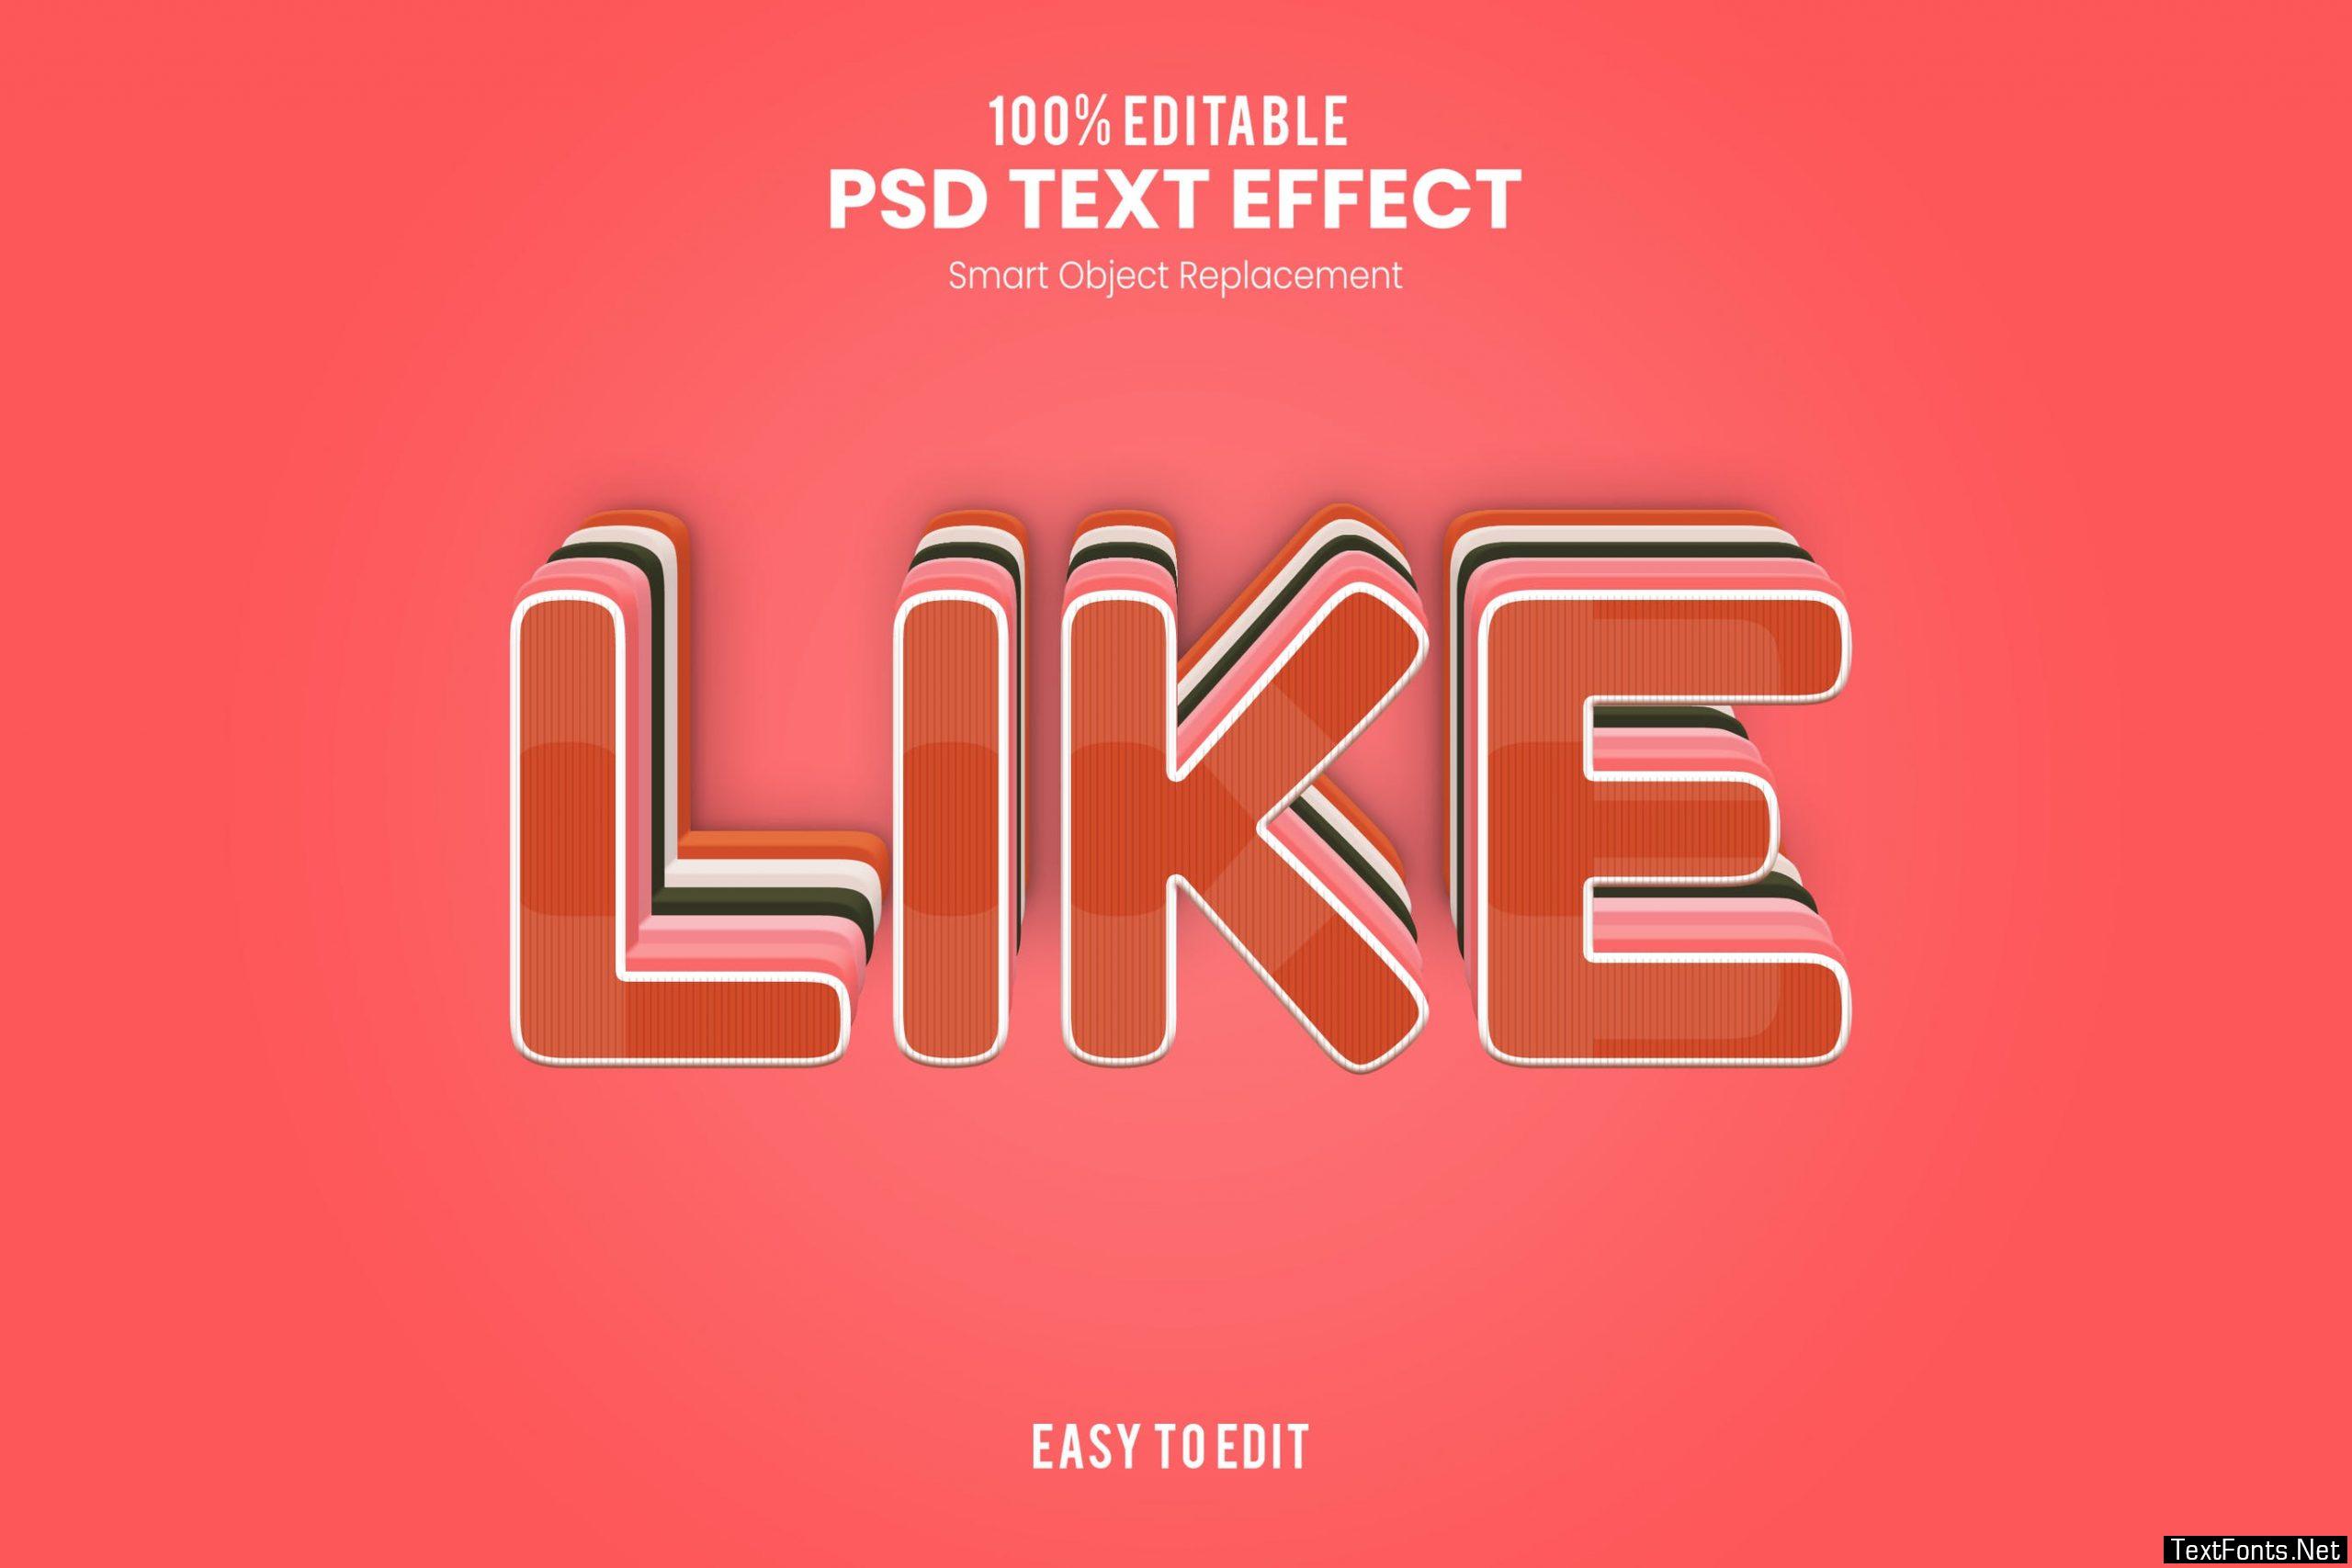 Like-Text Effect